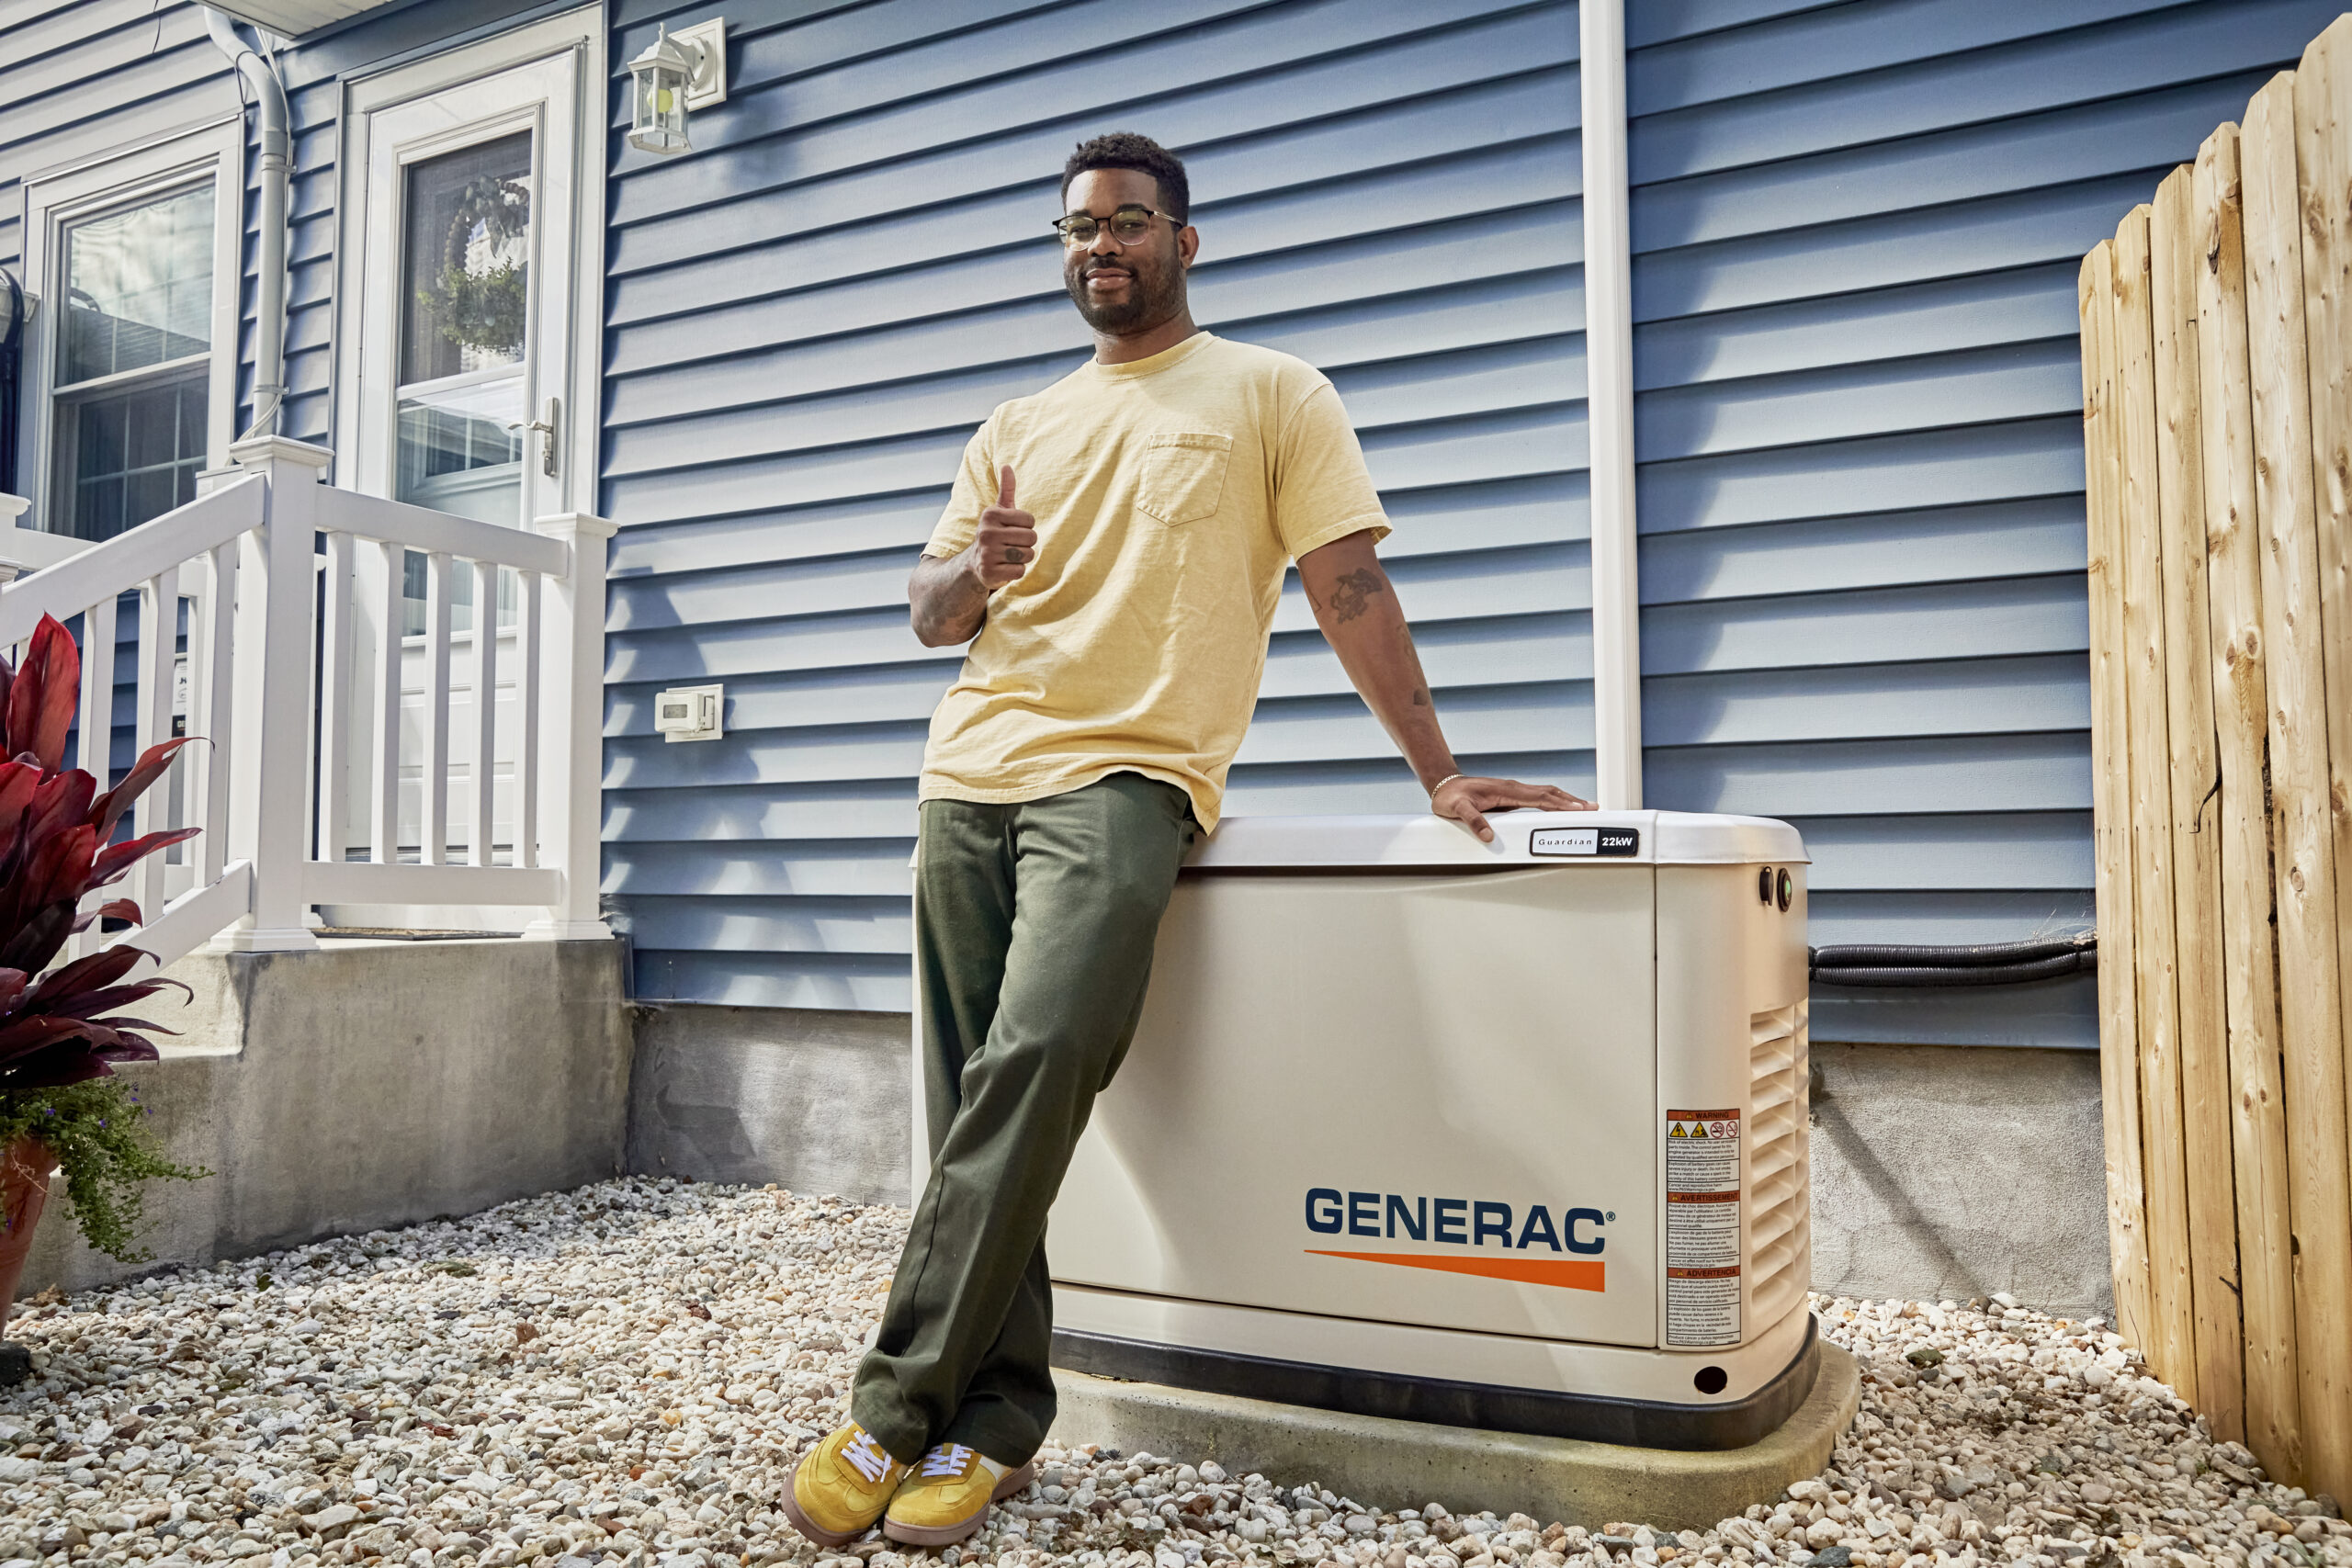 PowerMaster Electric specializes in installing top-quality generators from reputable manufacturers like Generac and Cummins